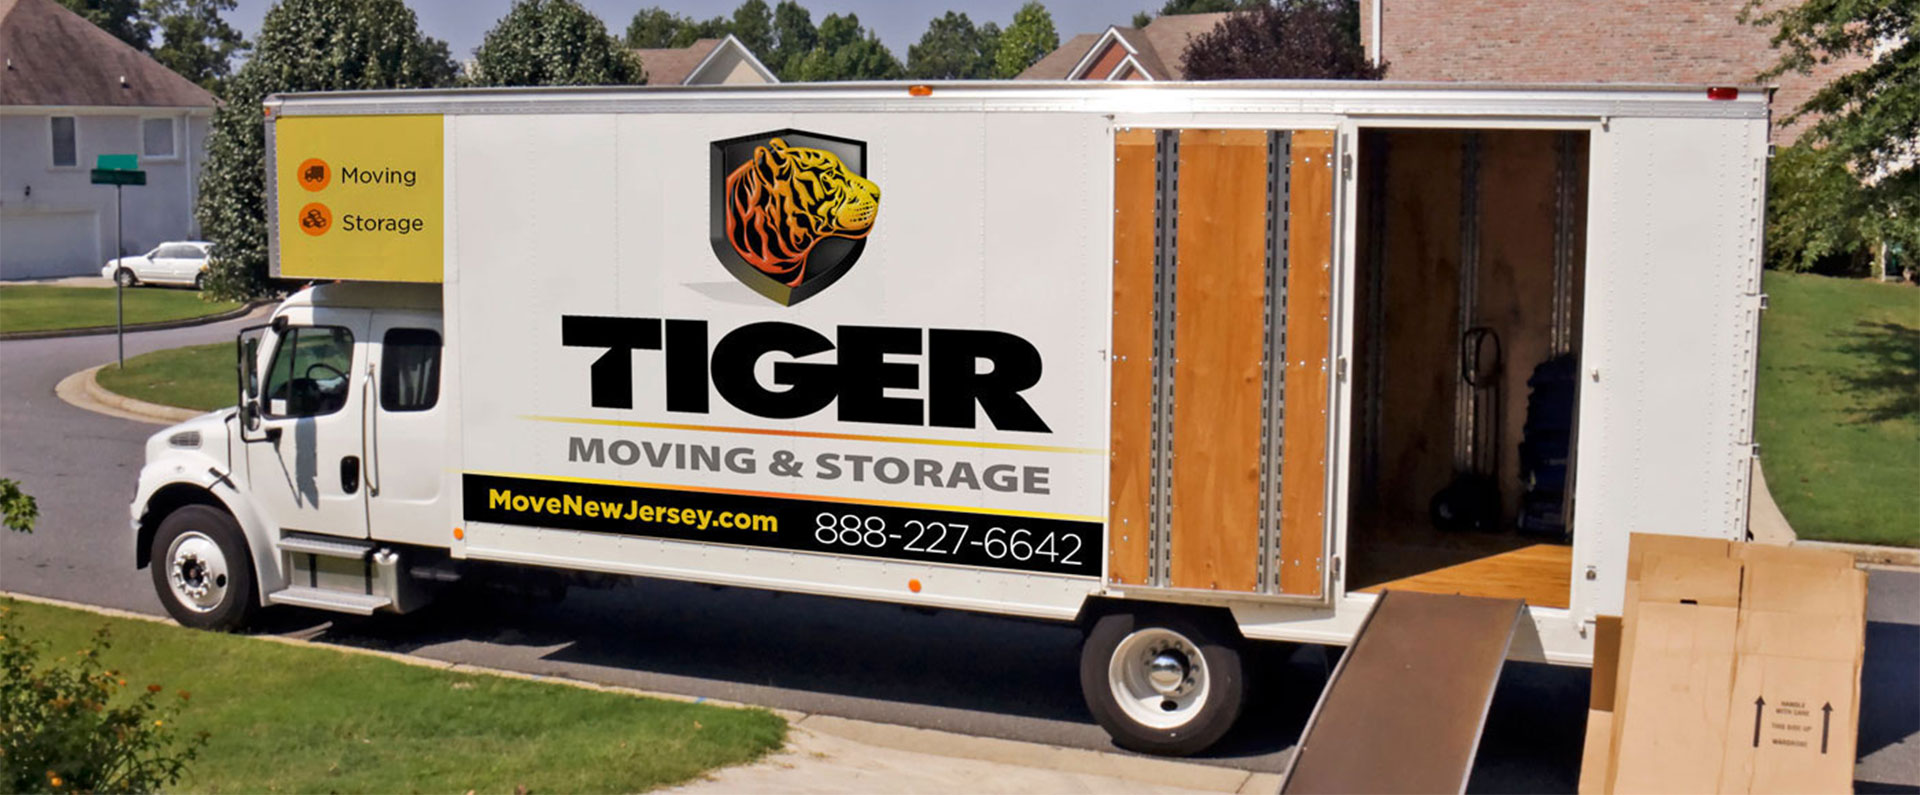 Bergen County Movers And Storage Experts How To Choose The Right Storage Unit